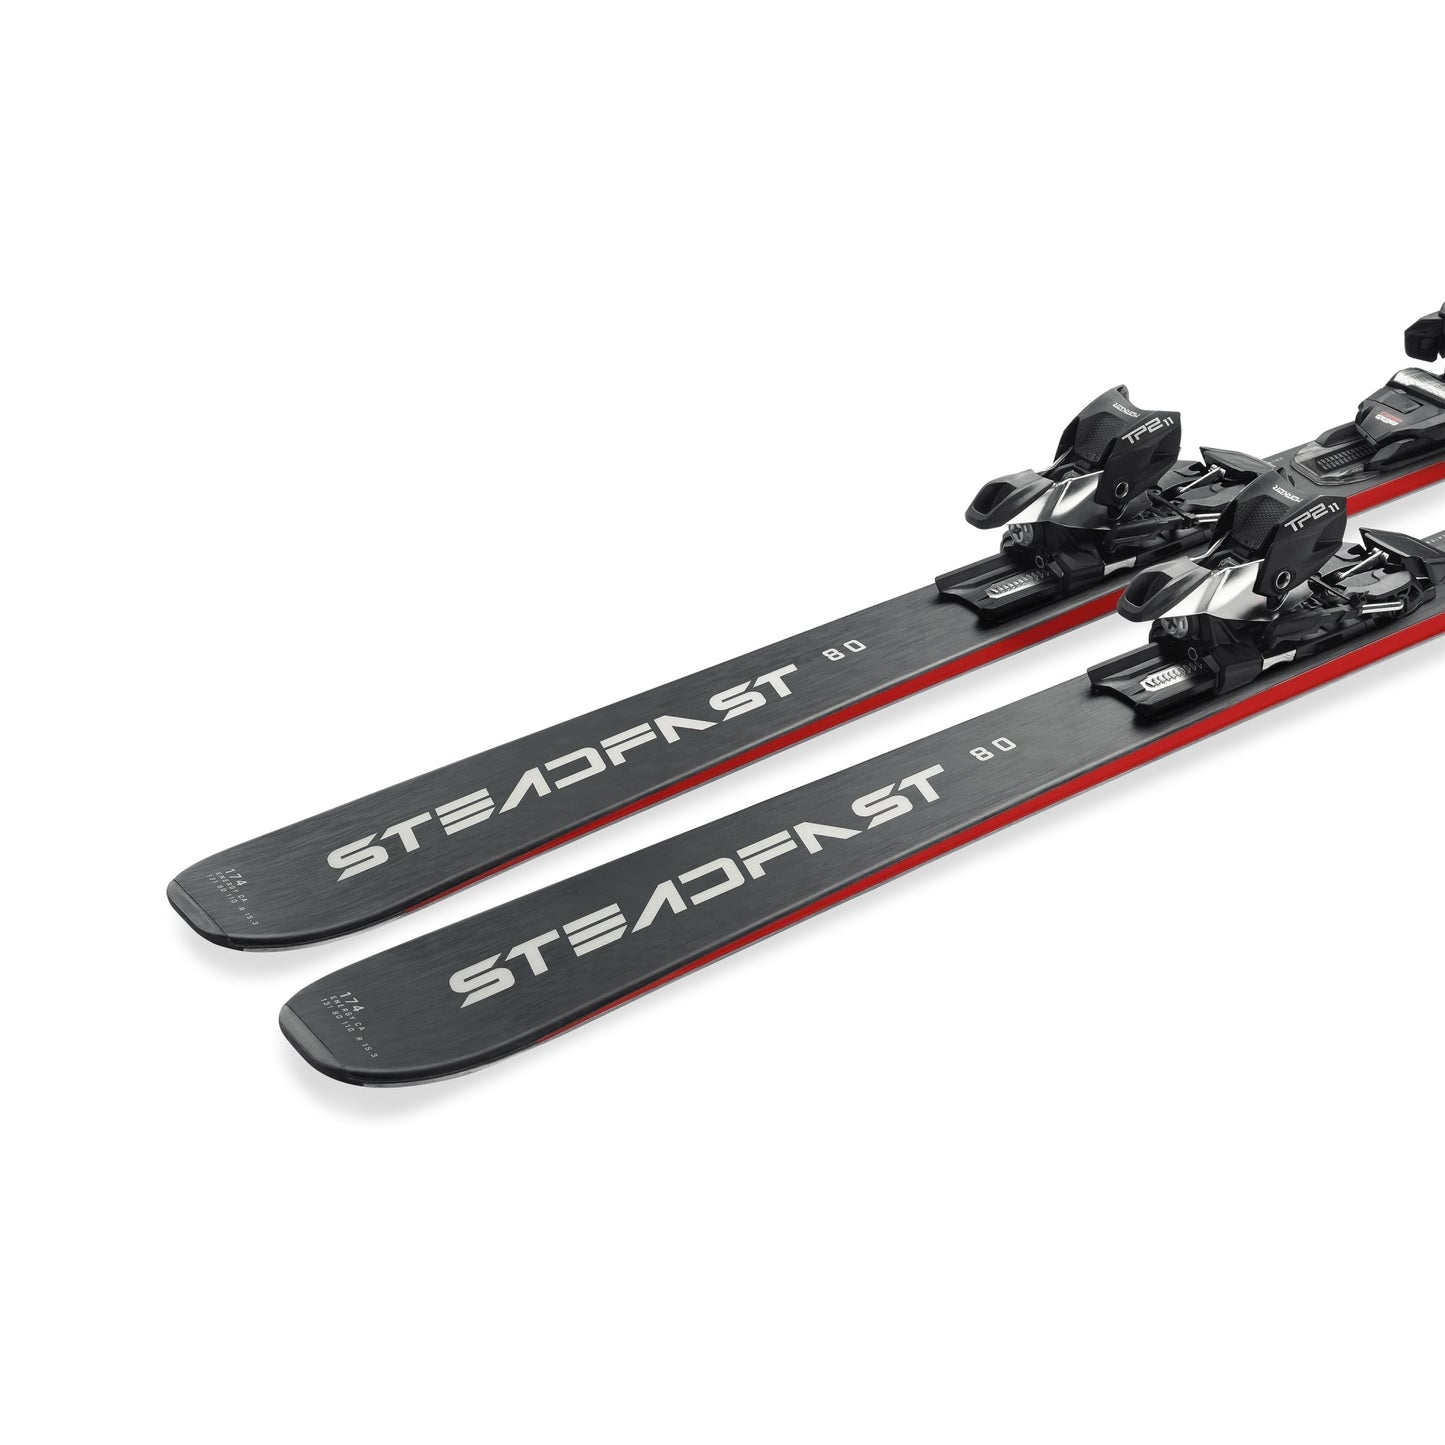 Nordica Steadfast 80 CA FDT with Binding 23/24